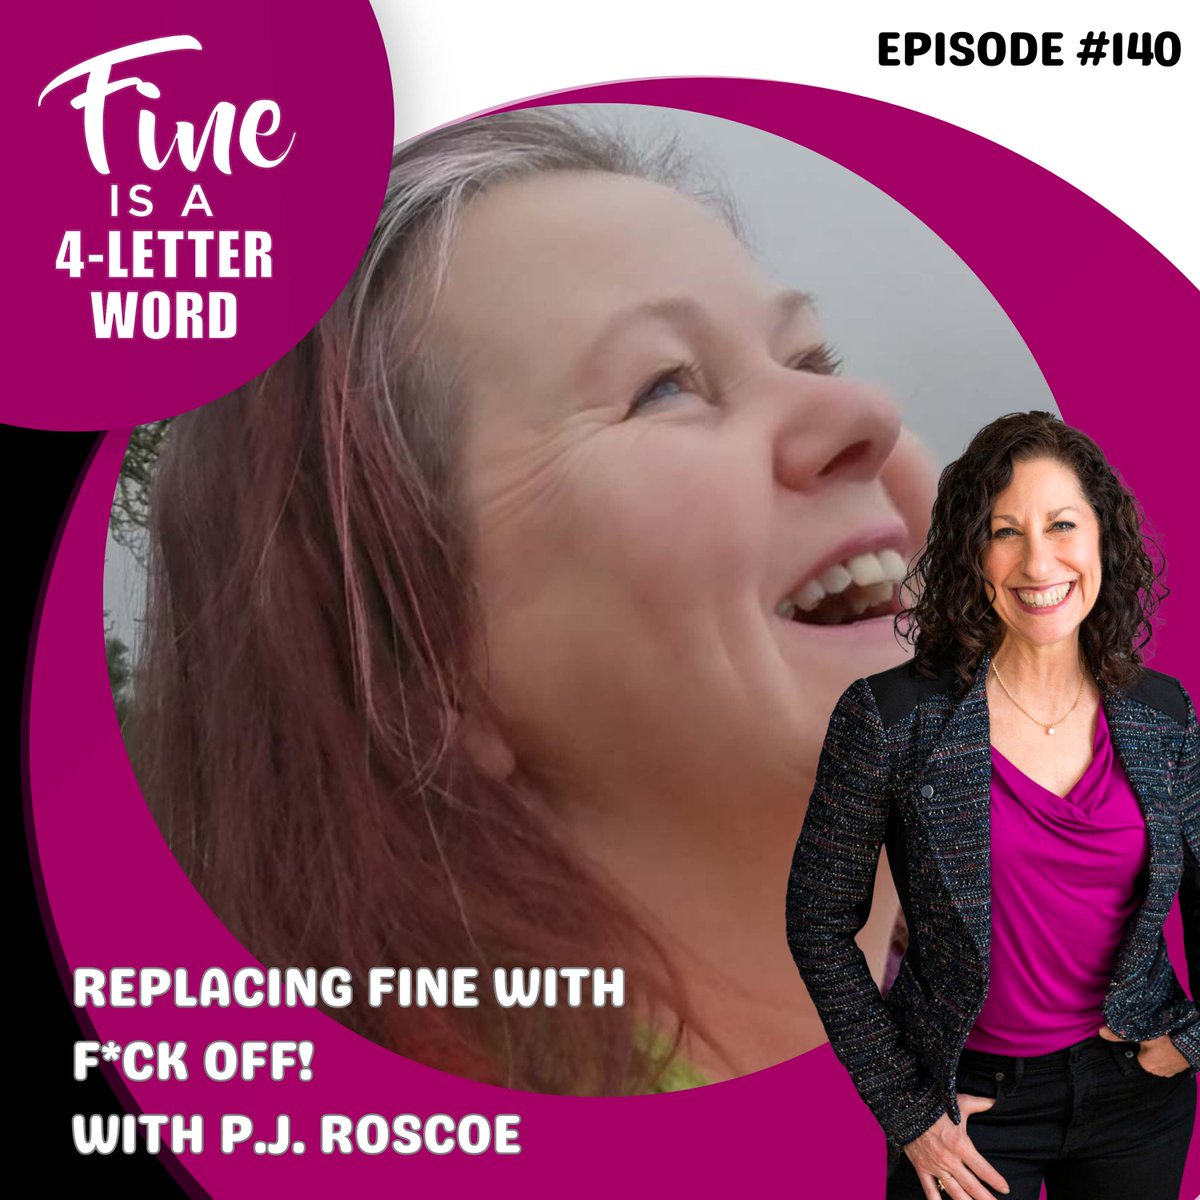 zenrabbit.com/podcast/replac… Fine is a four letter word that I know that when people say it, they are merely throwing my question away, believing I don't really want to know! If I asked, I want to know ☺️ #fineisafourletterword #fine #podcast #gethonest #speakyourtruth